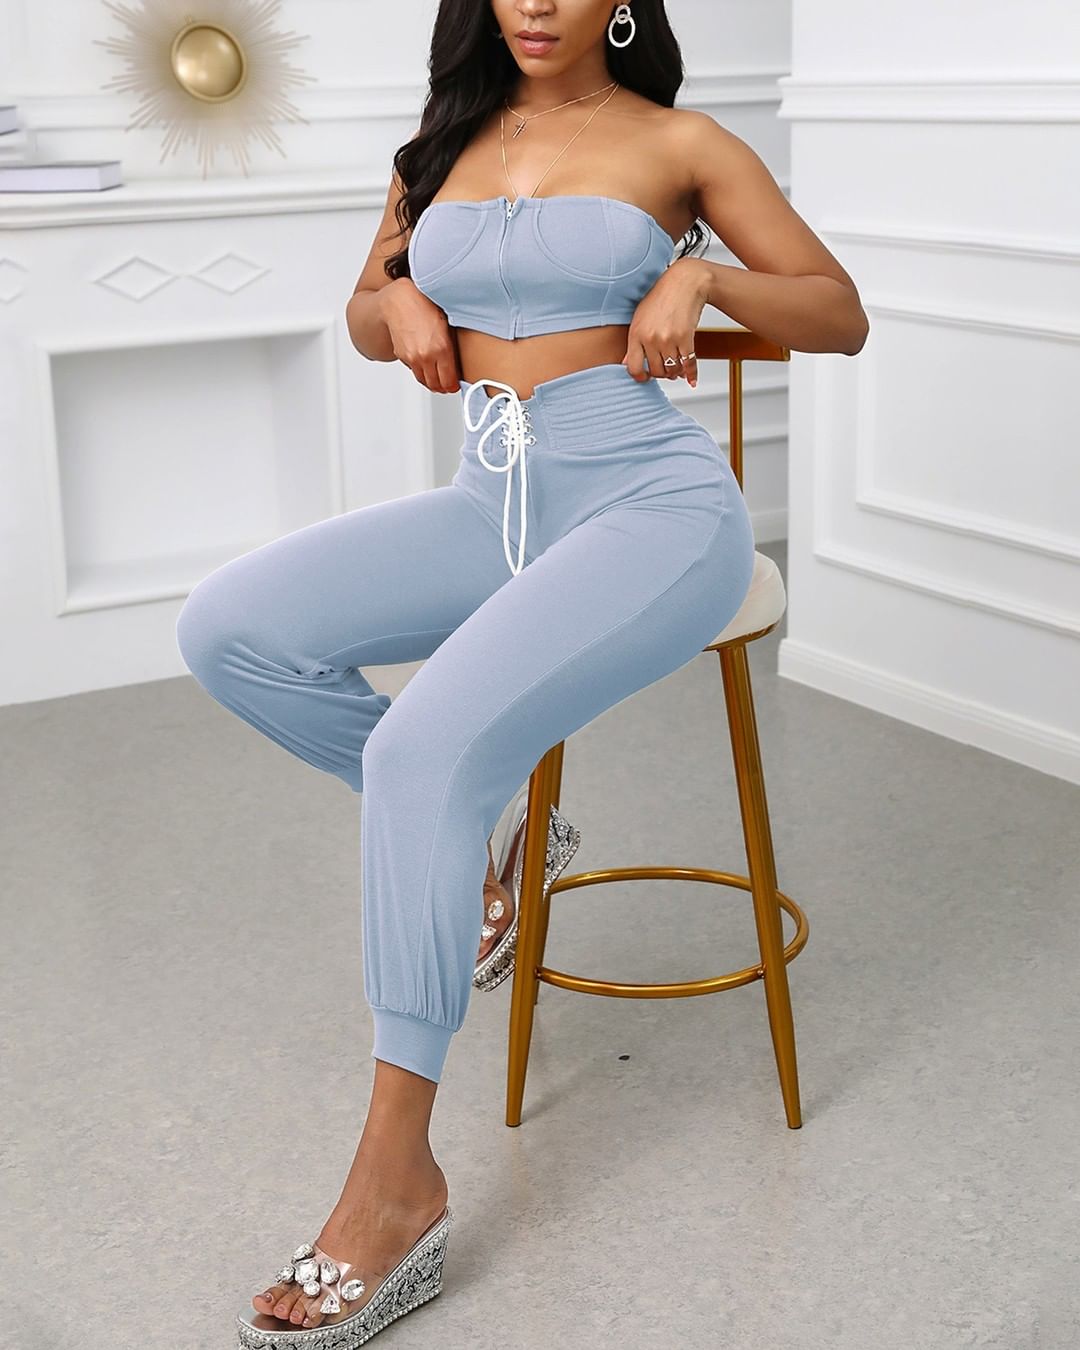 boutiquefeel_official - Zipper Front Bandeau Top & Eyelet Lace-up Pants Set⁠
Click https://www.boutiquefeel.com to ⁠
search CY1224 get more details.⁠
⁠
 #fashion #love #style